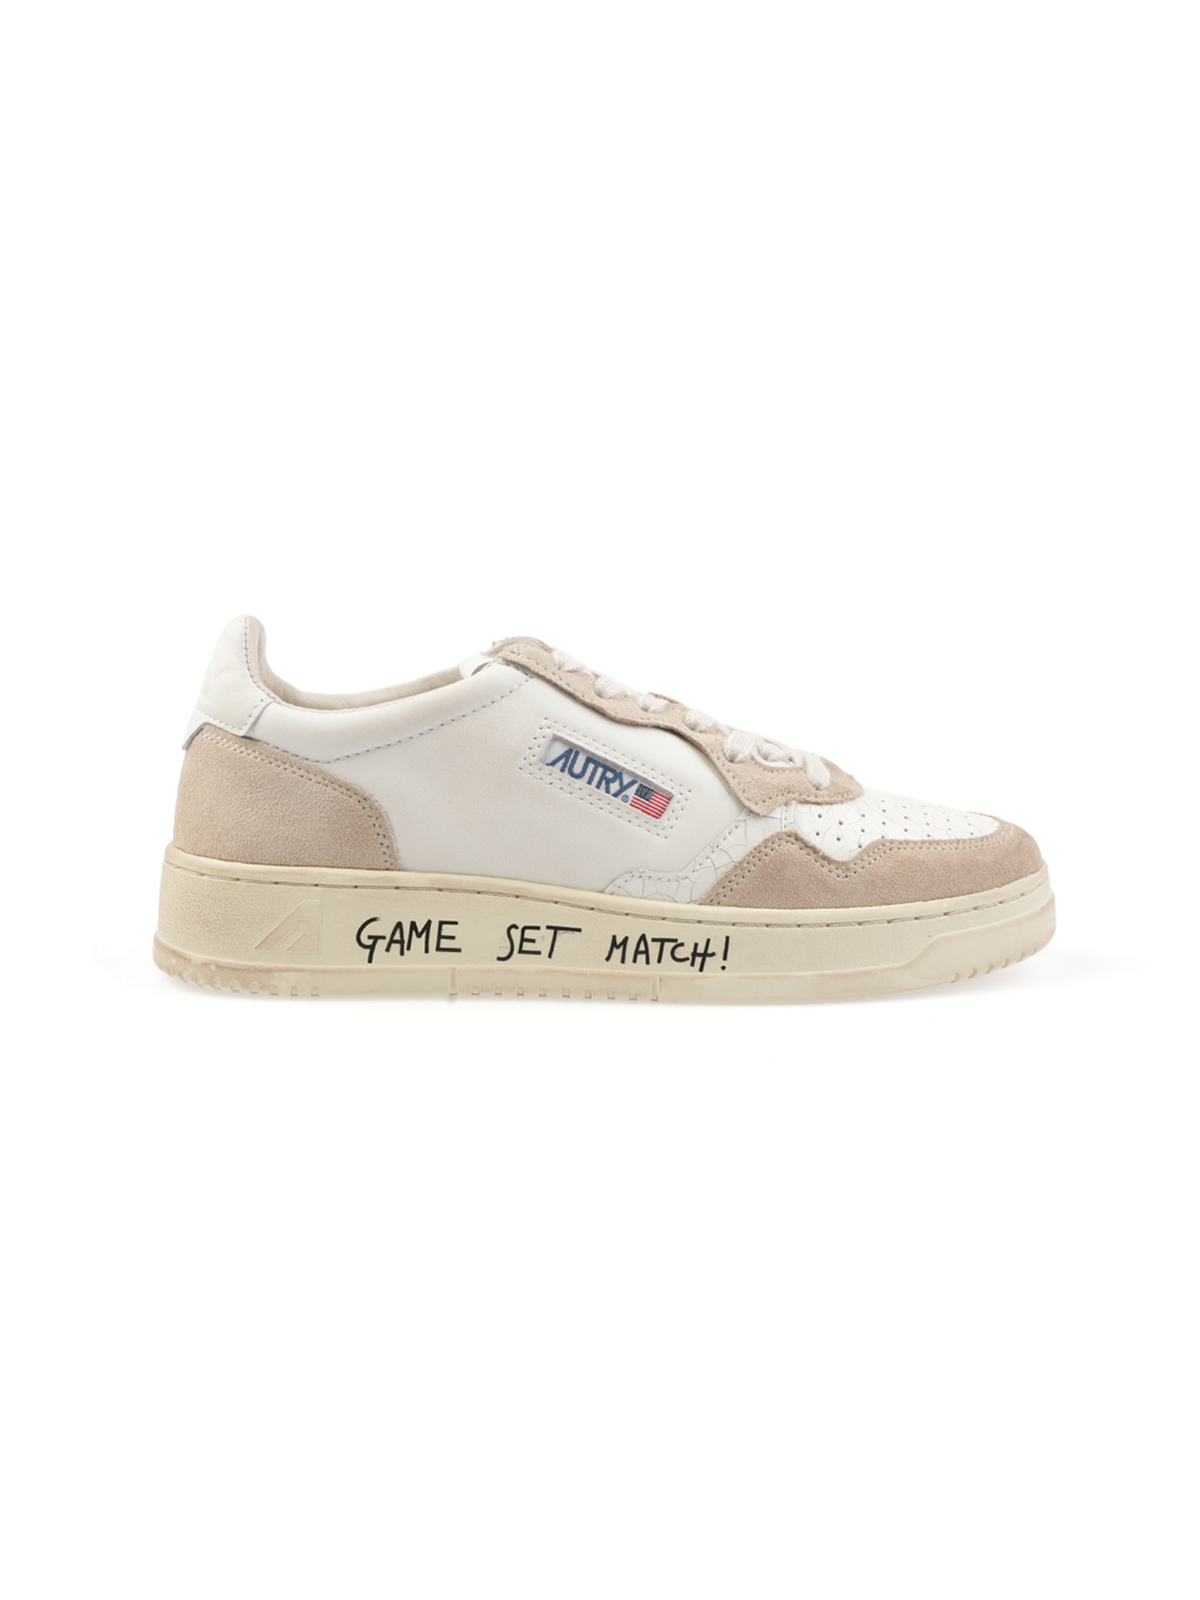 Immagine di AUTRY | Sneakers Uomo Medalist Low Game Set Match